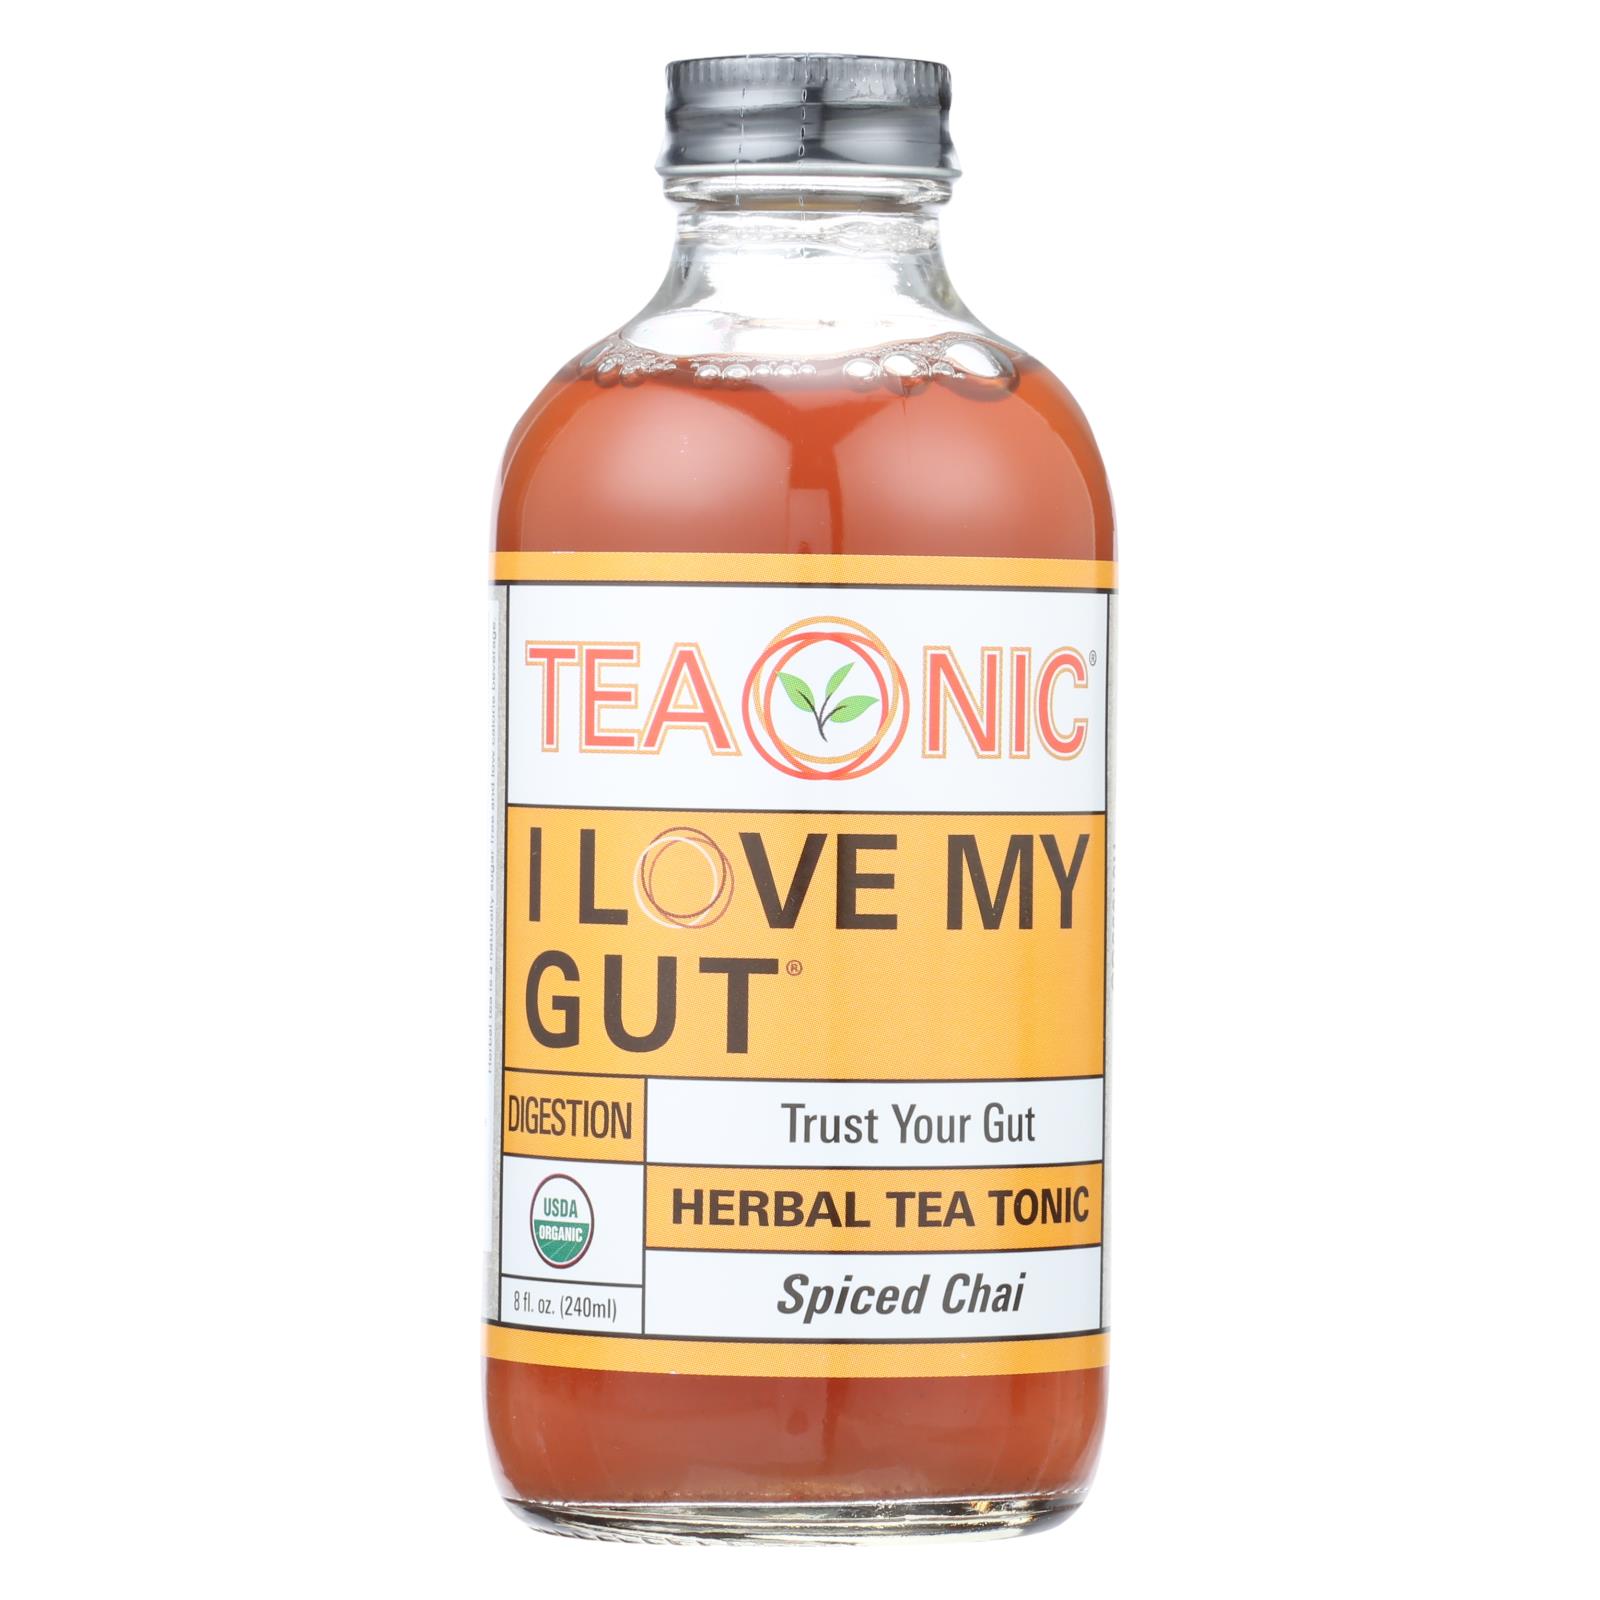 Teaonic I Love My Gut Herbal Tea Supplement - Case of 6 - 8 FZ